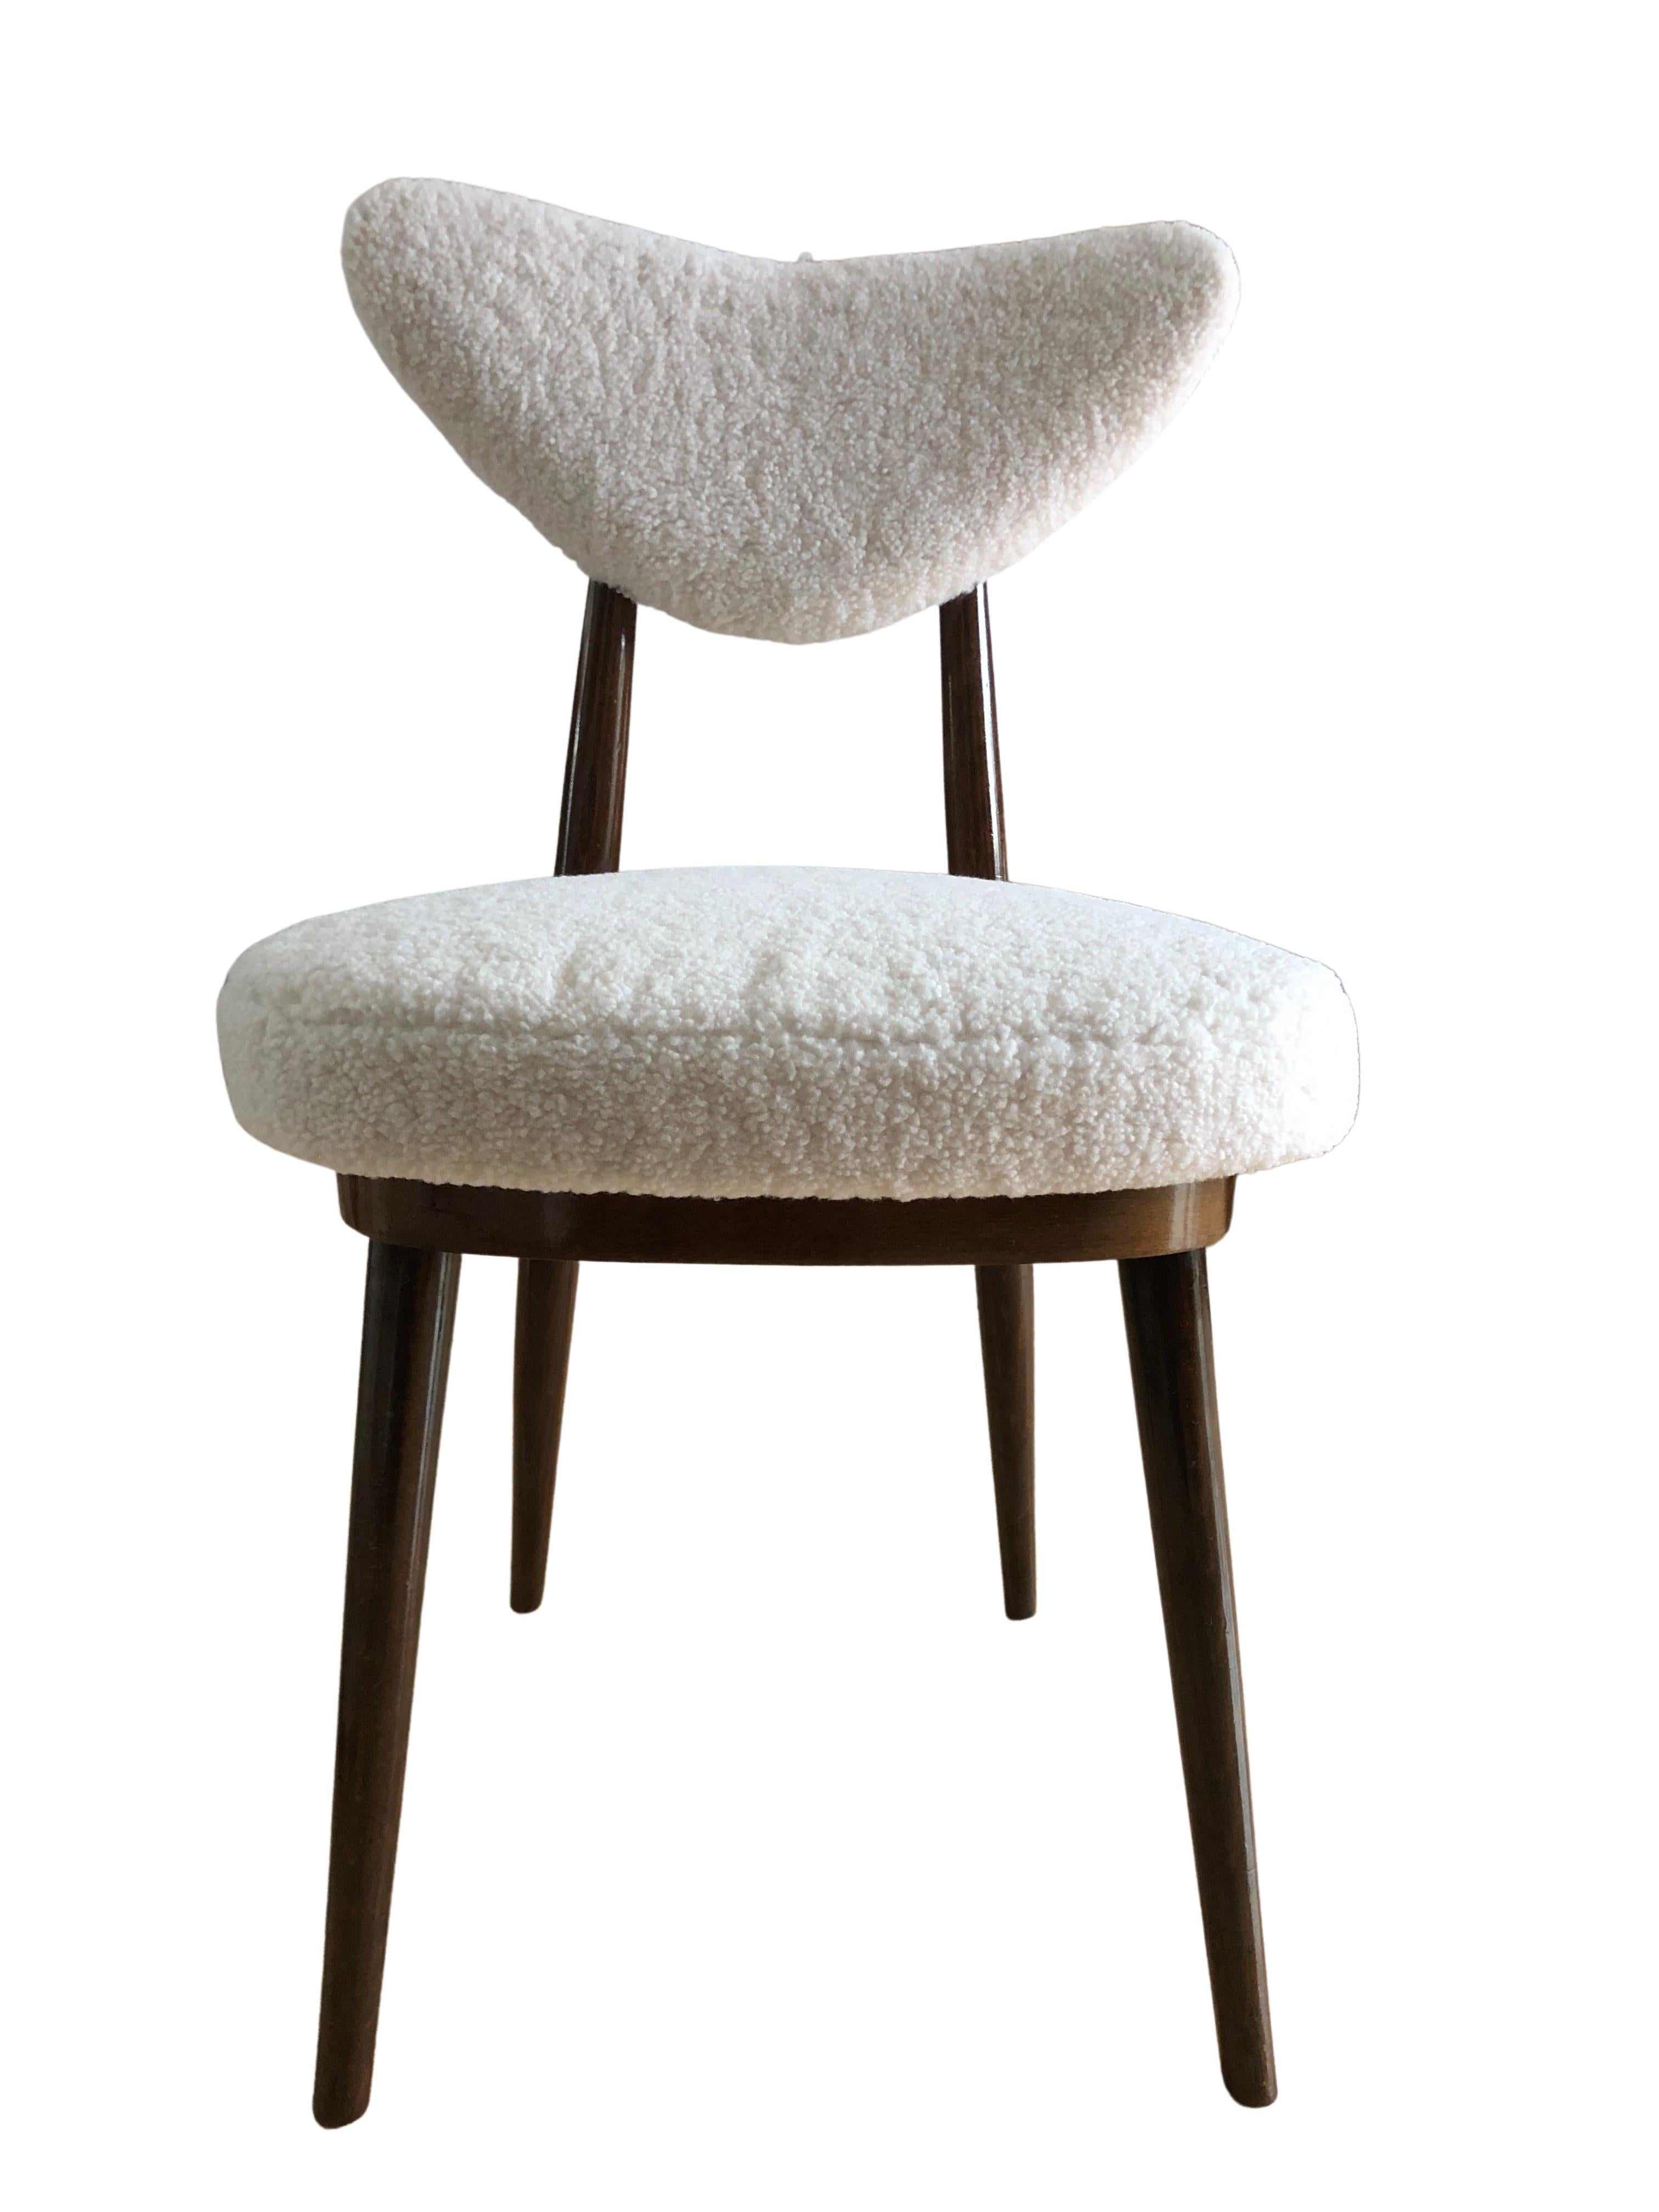 Hand-Crafted Set of Two Midcentury White Bouclé Heart Chairs, by Kurmanowicz, 1960s For Sale